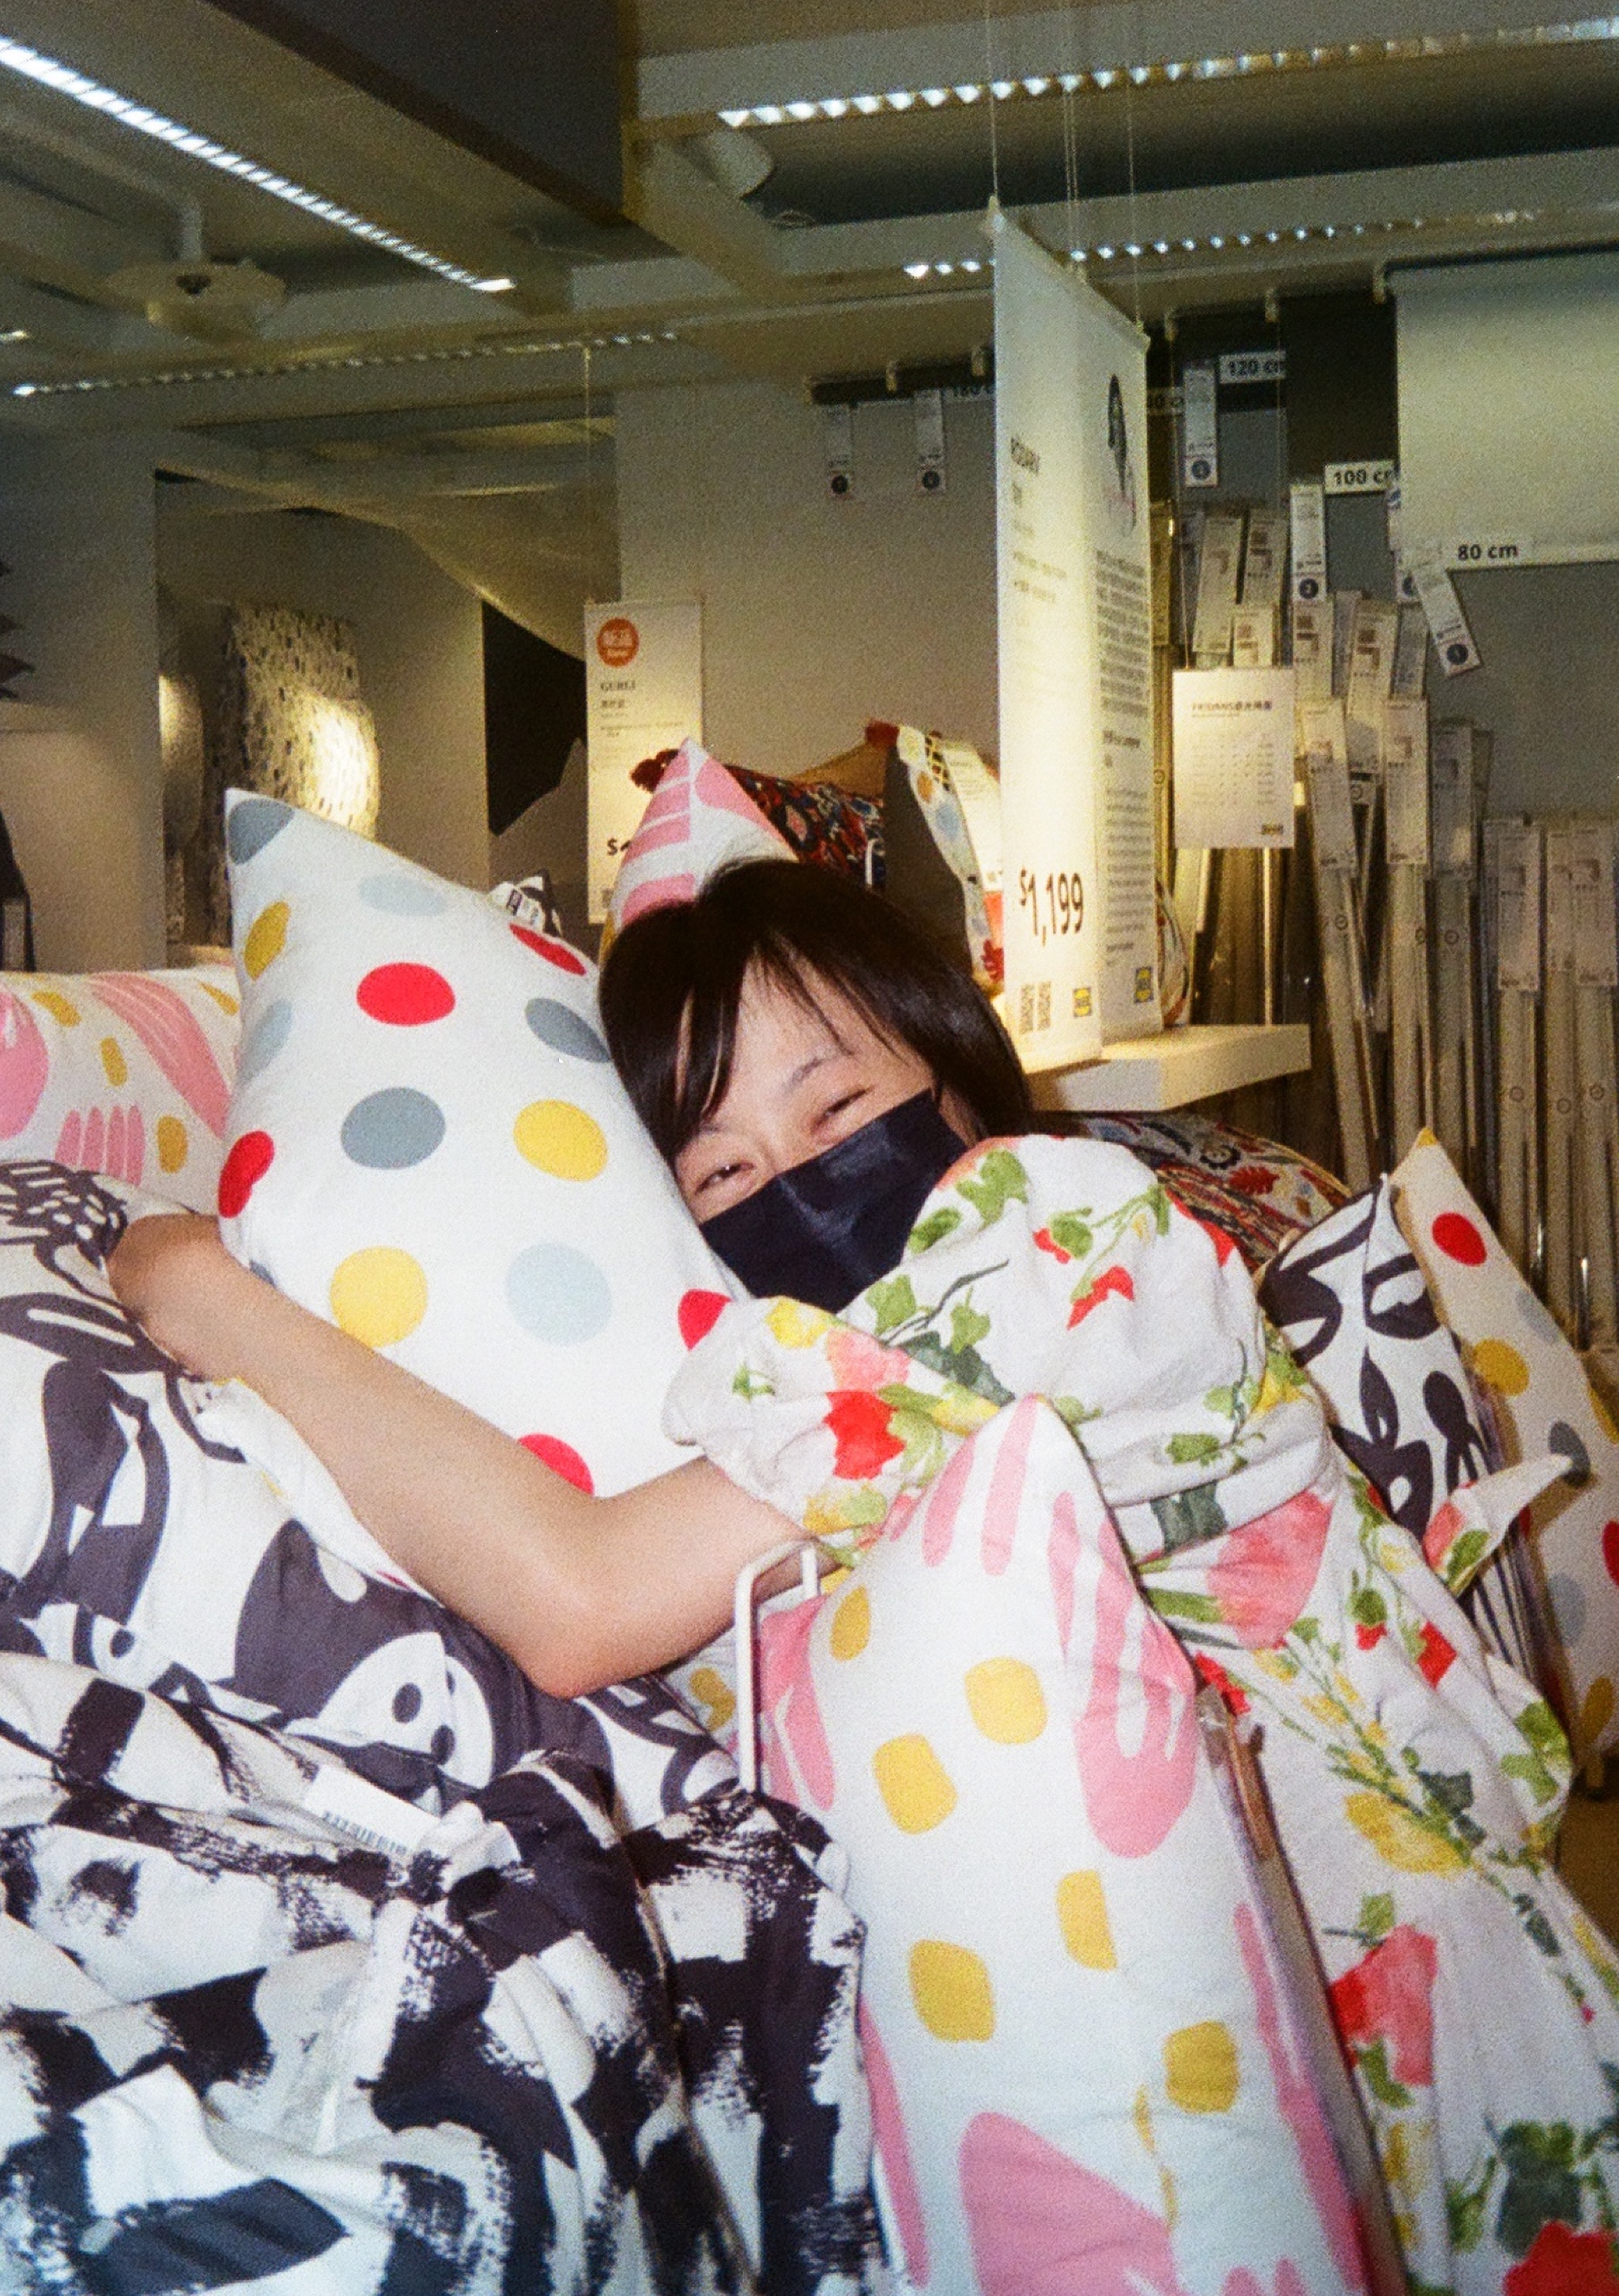 A woman wearing a mask hugging a pillow whose pattern matches the colors of her dress.